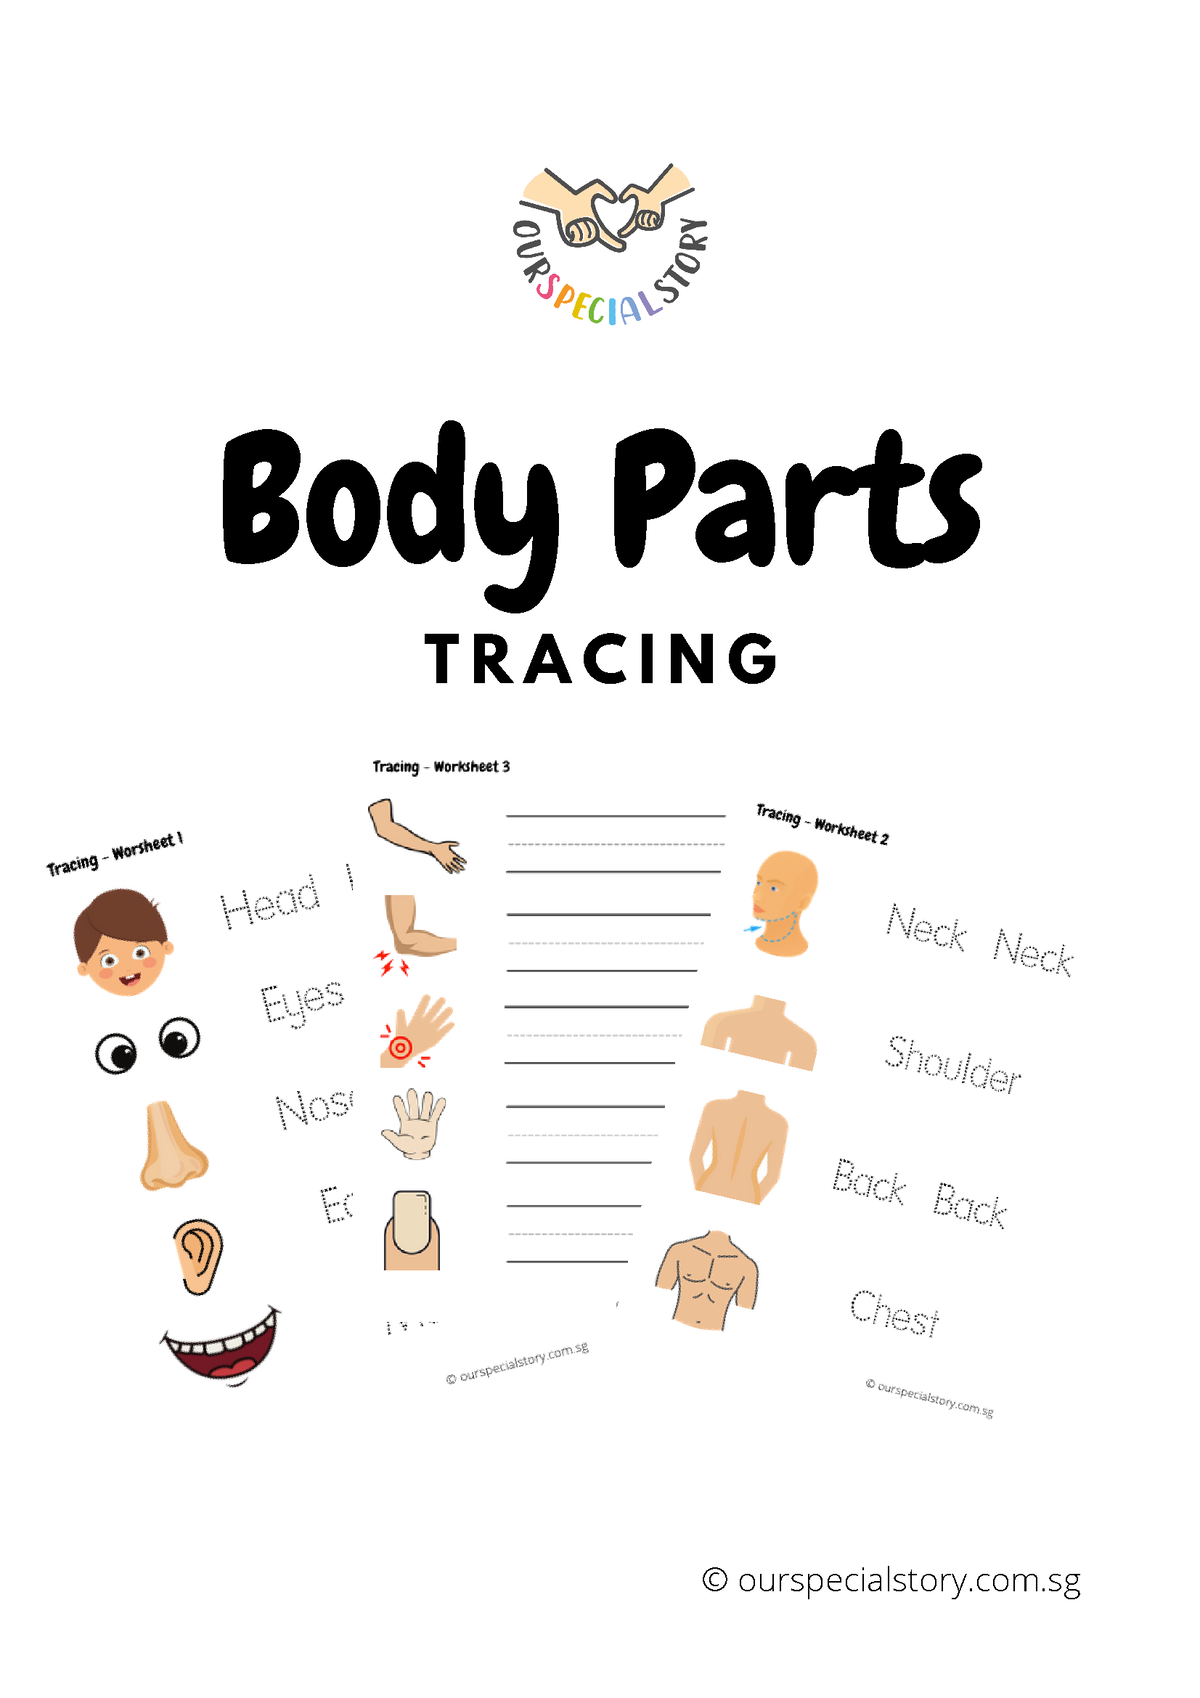 body-parts-tracing-and-writing-english-body-parts-t-r-a-c-i-n-g